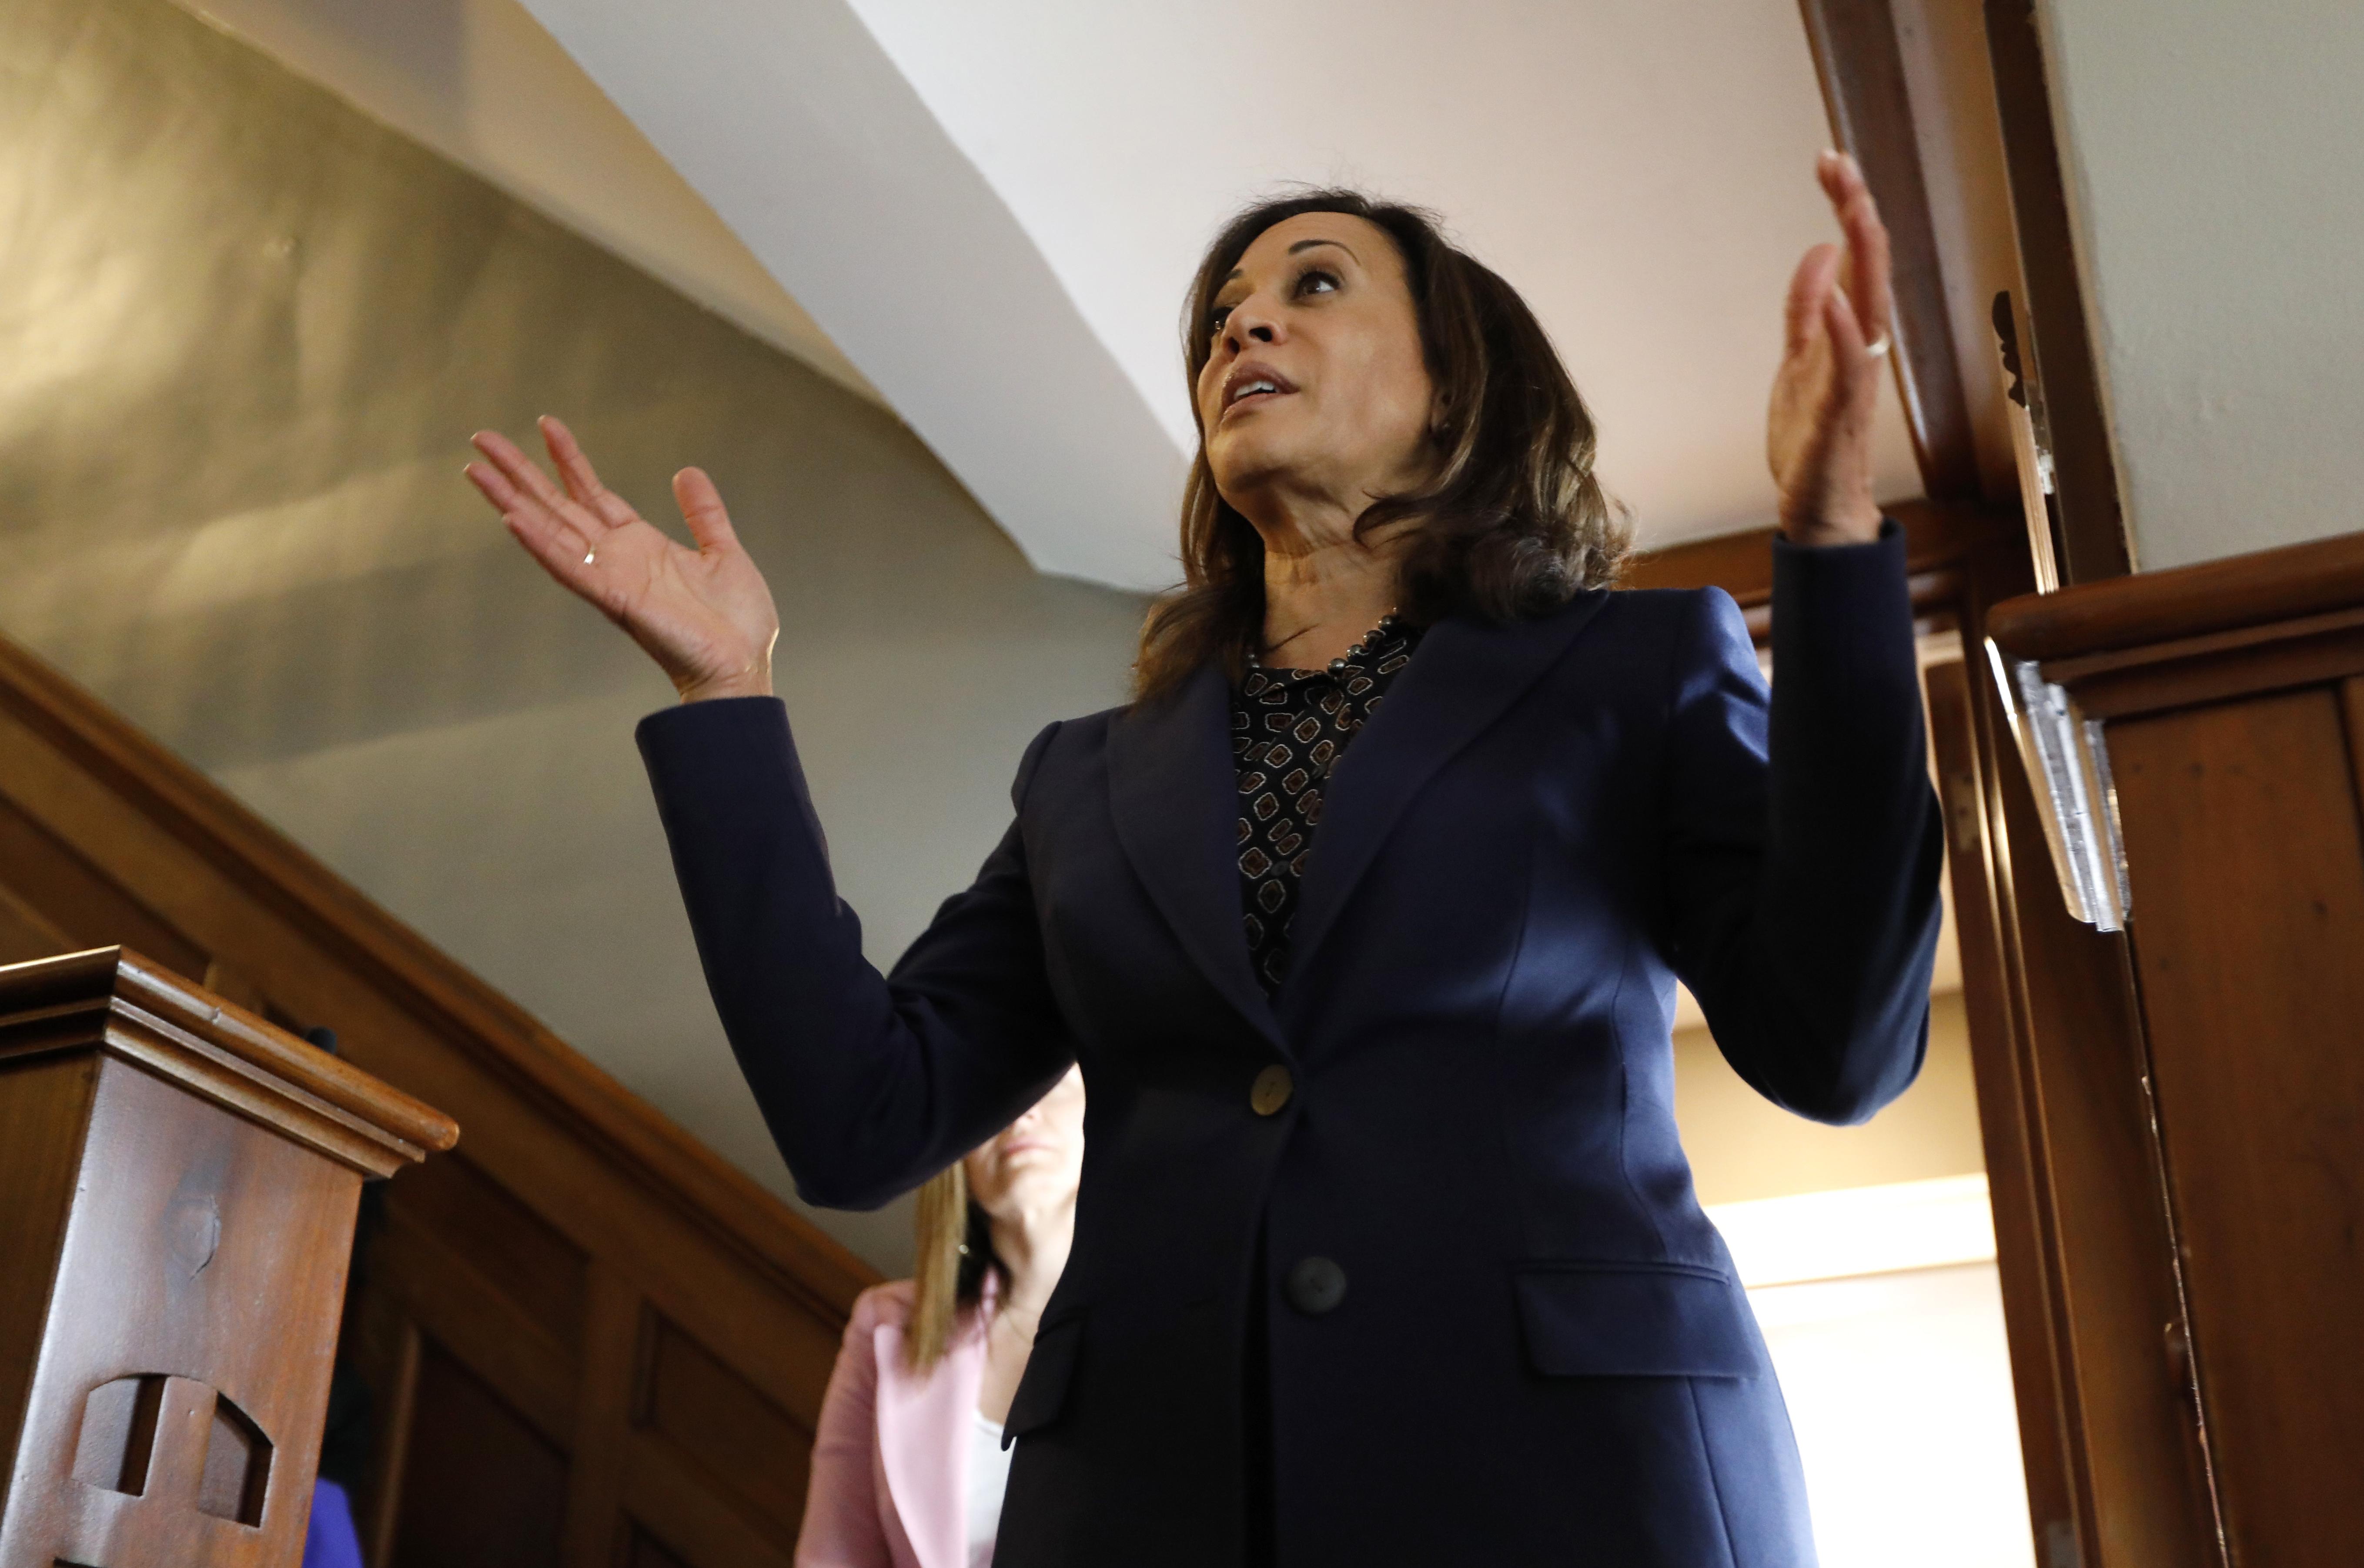 2020 Democrats raising less money as donors sit on sidelines | The Spokesman-Review